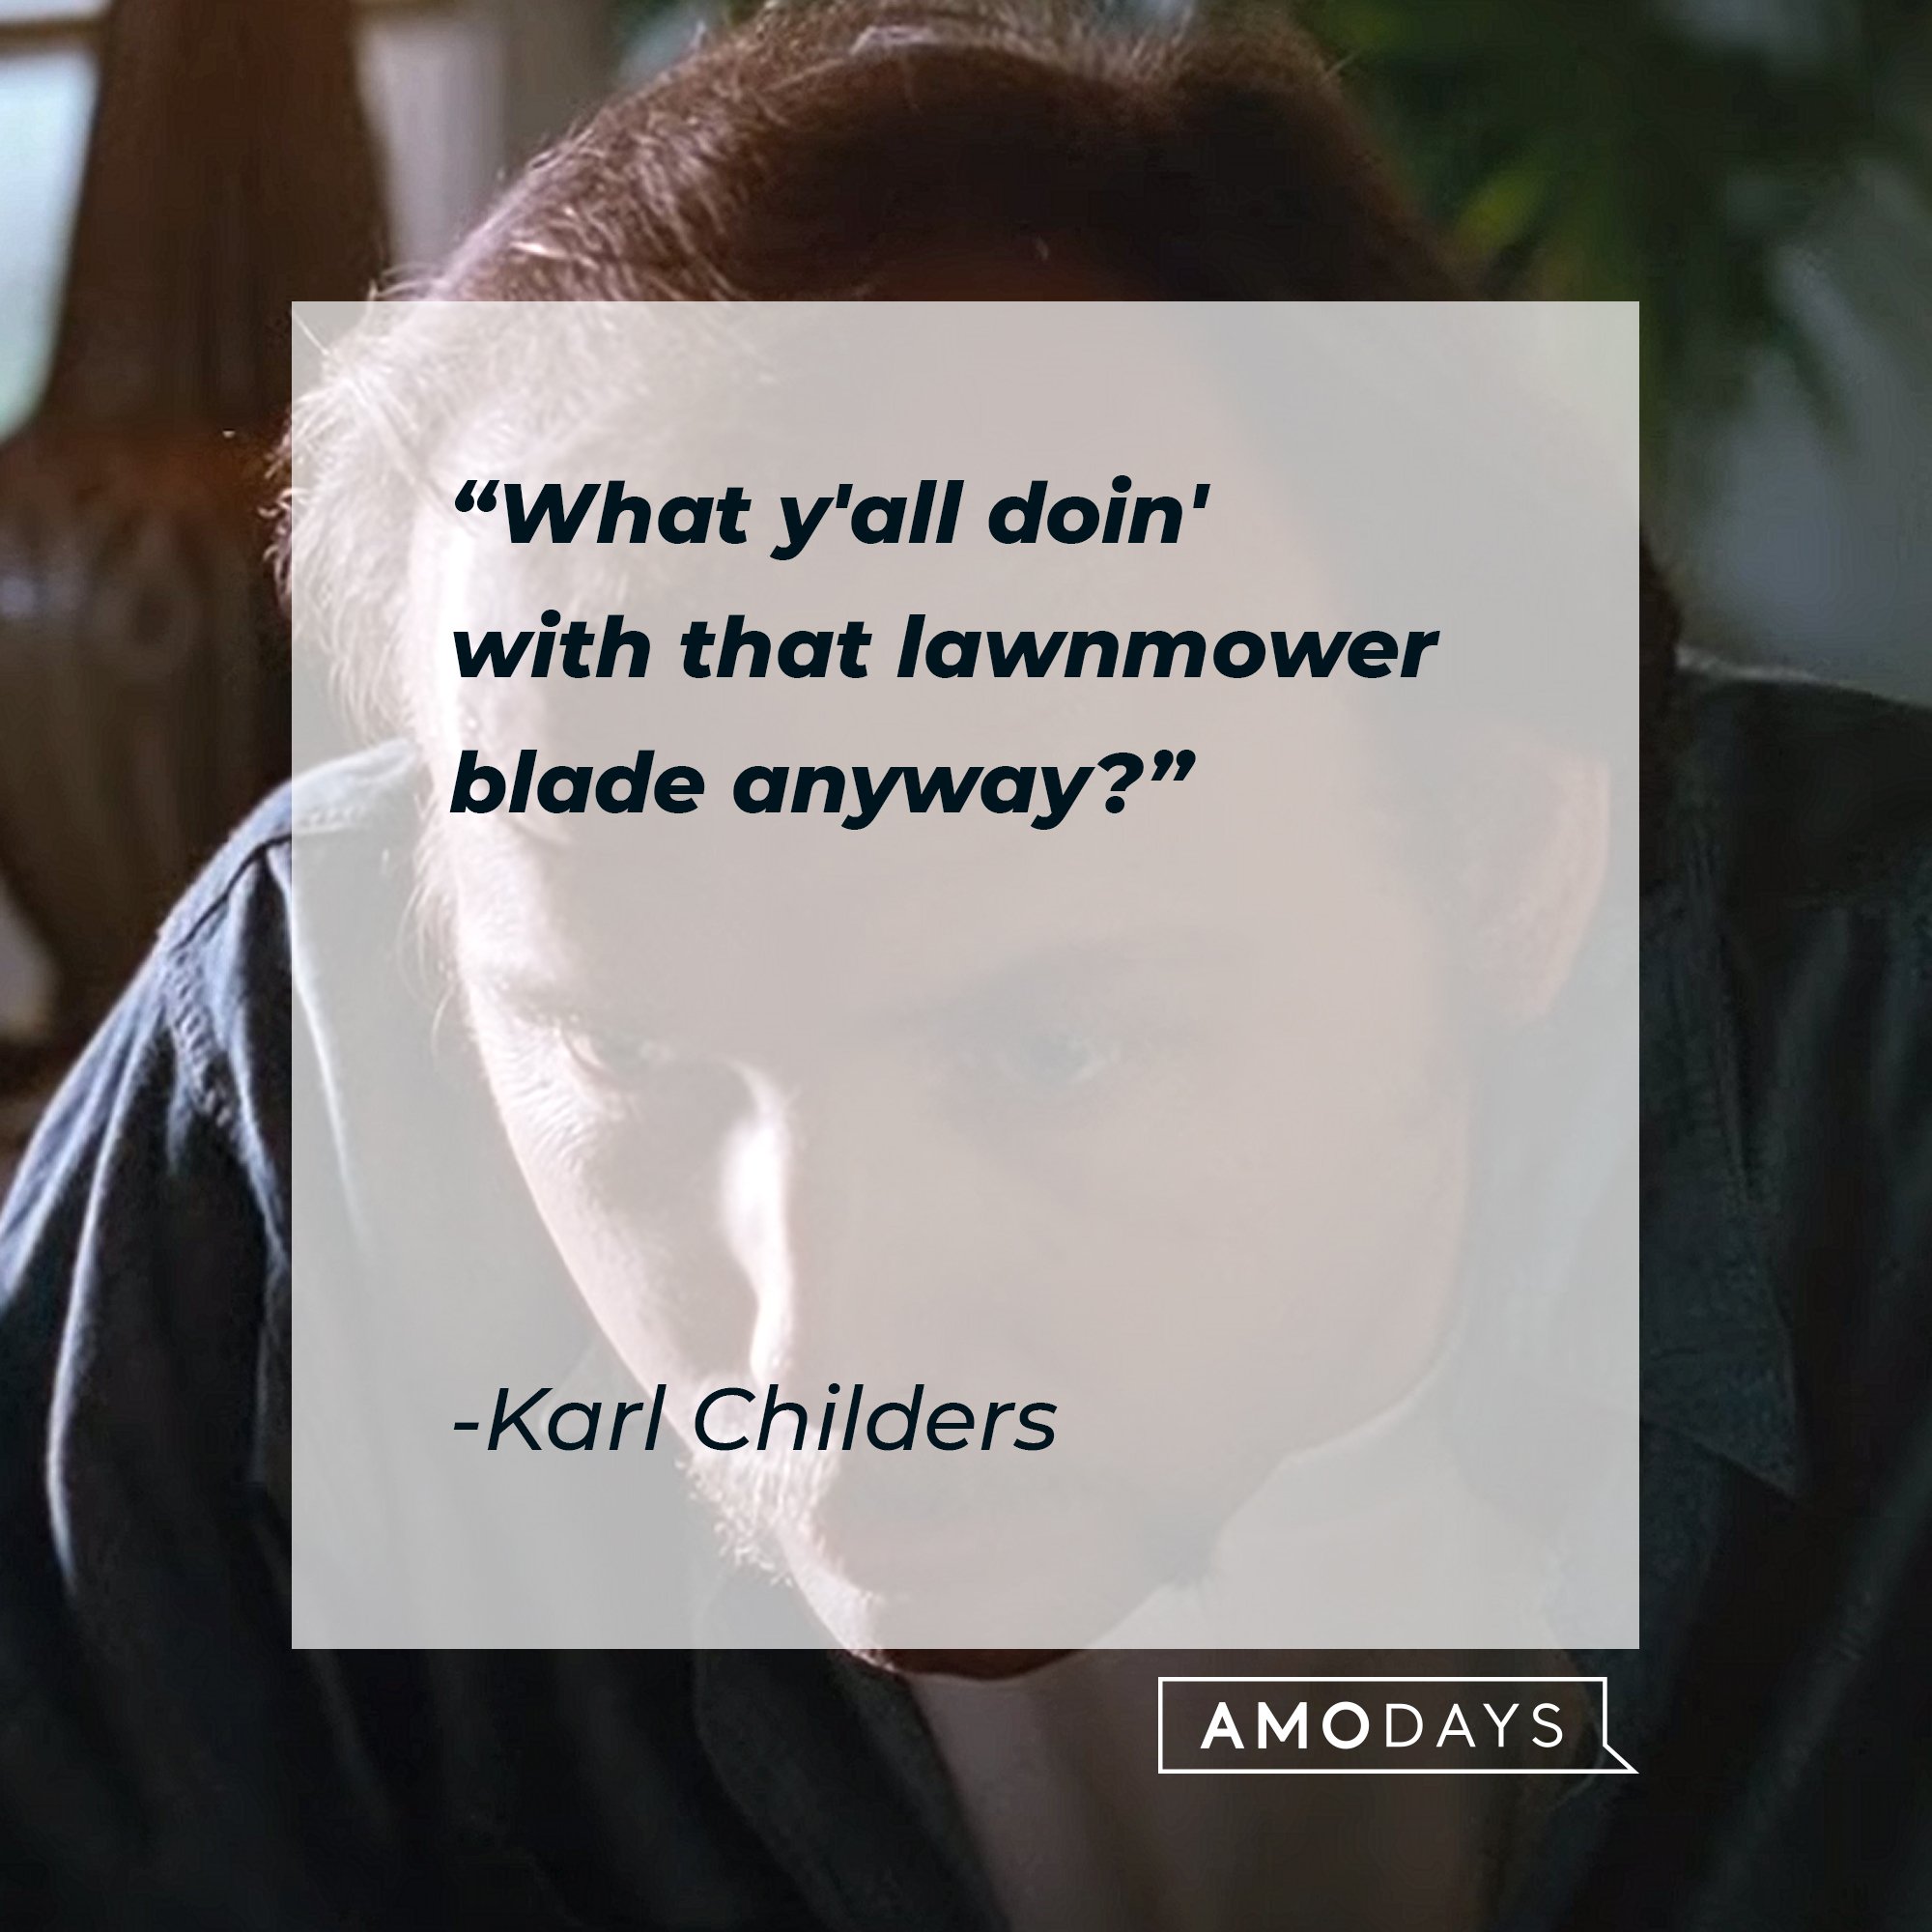 Karl Childers' quote: "What y'all doin' with that lawnmower blade anyway?" | Image: AmoDays